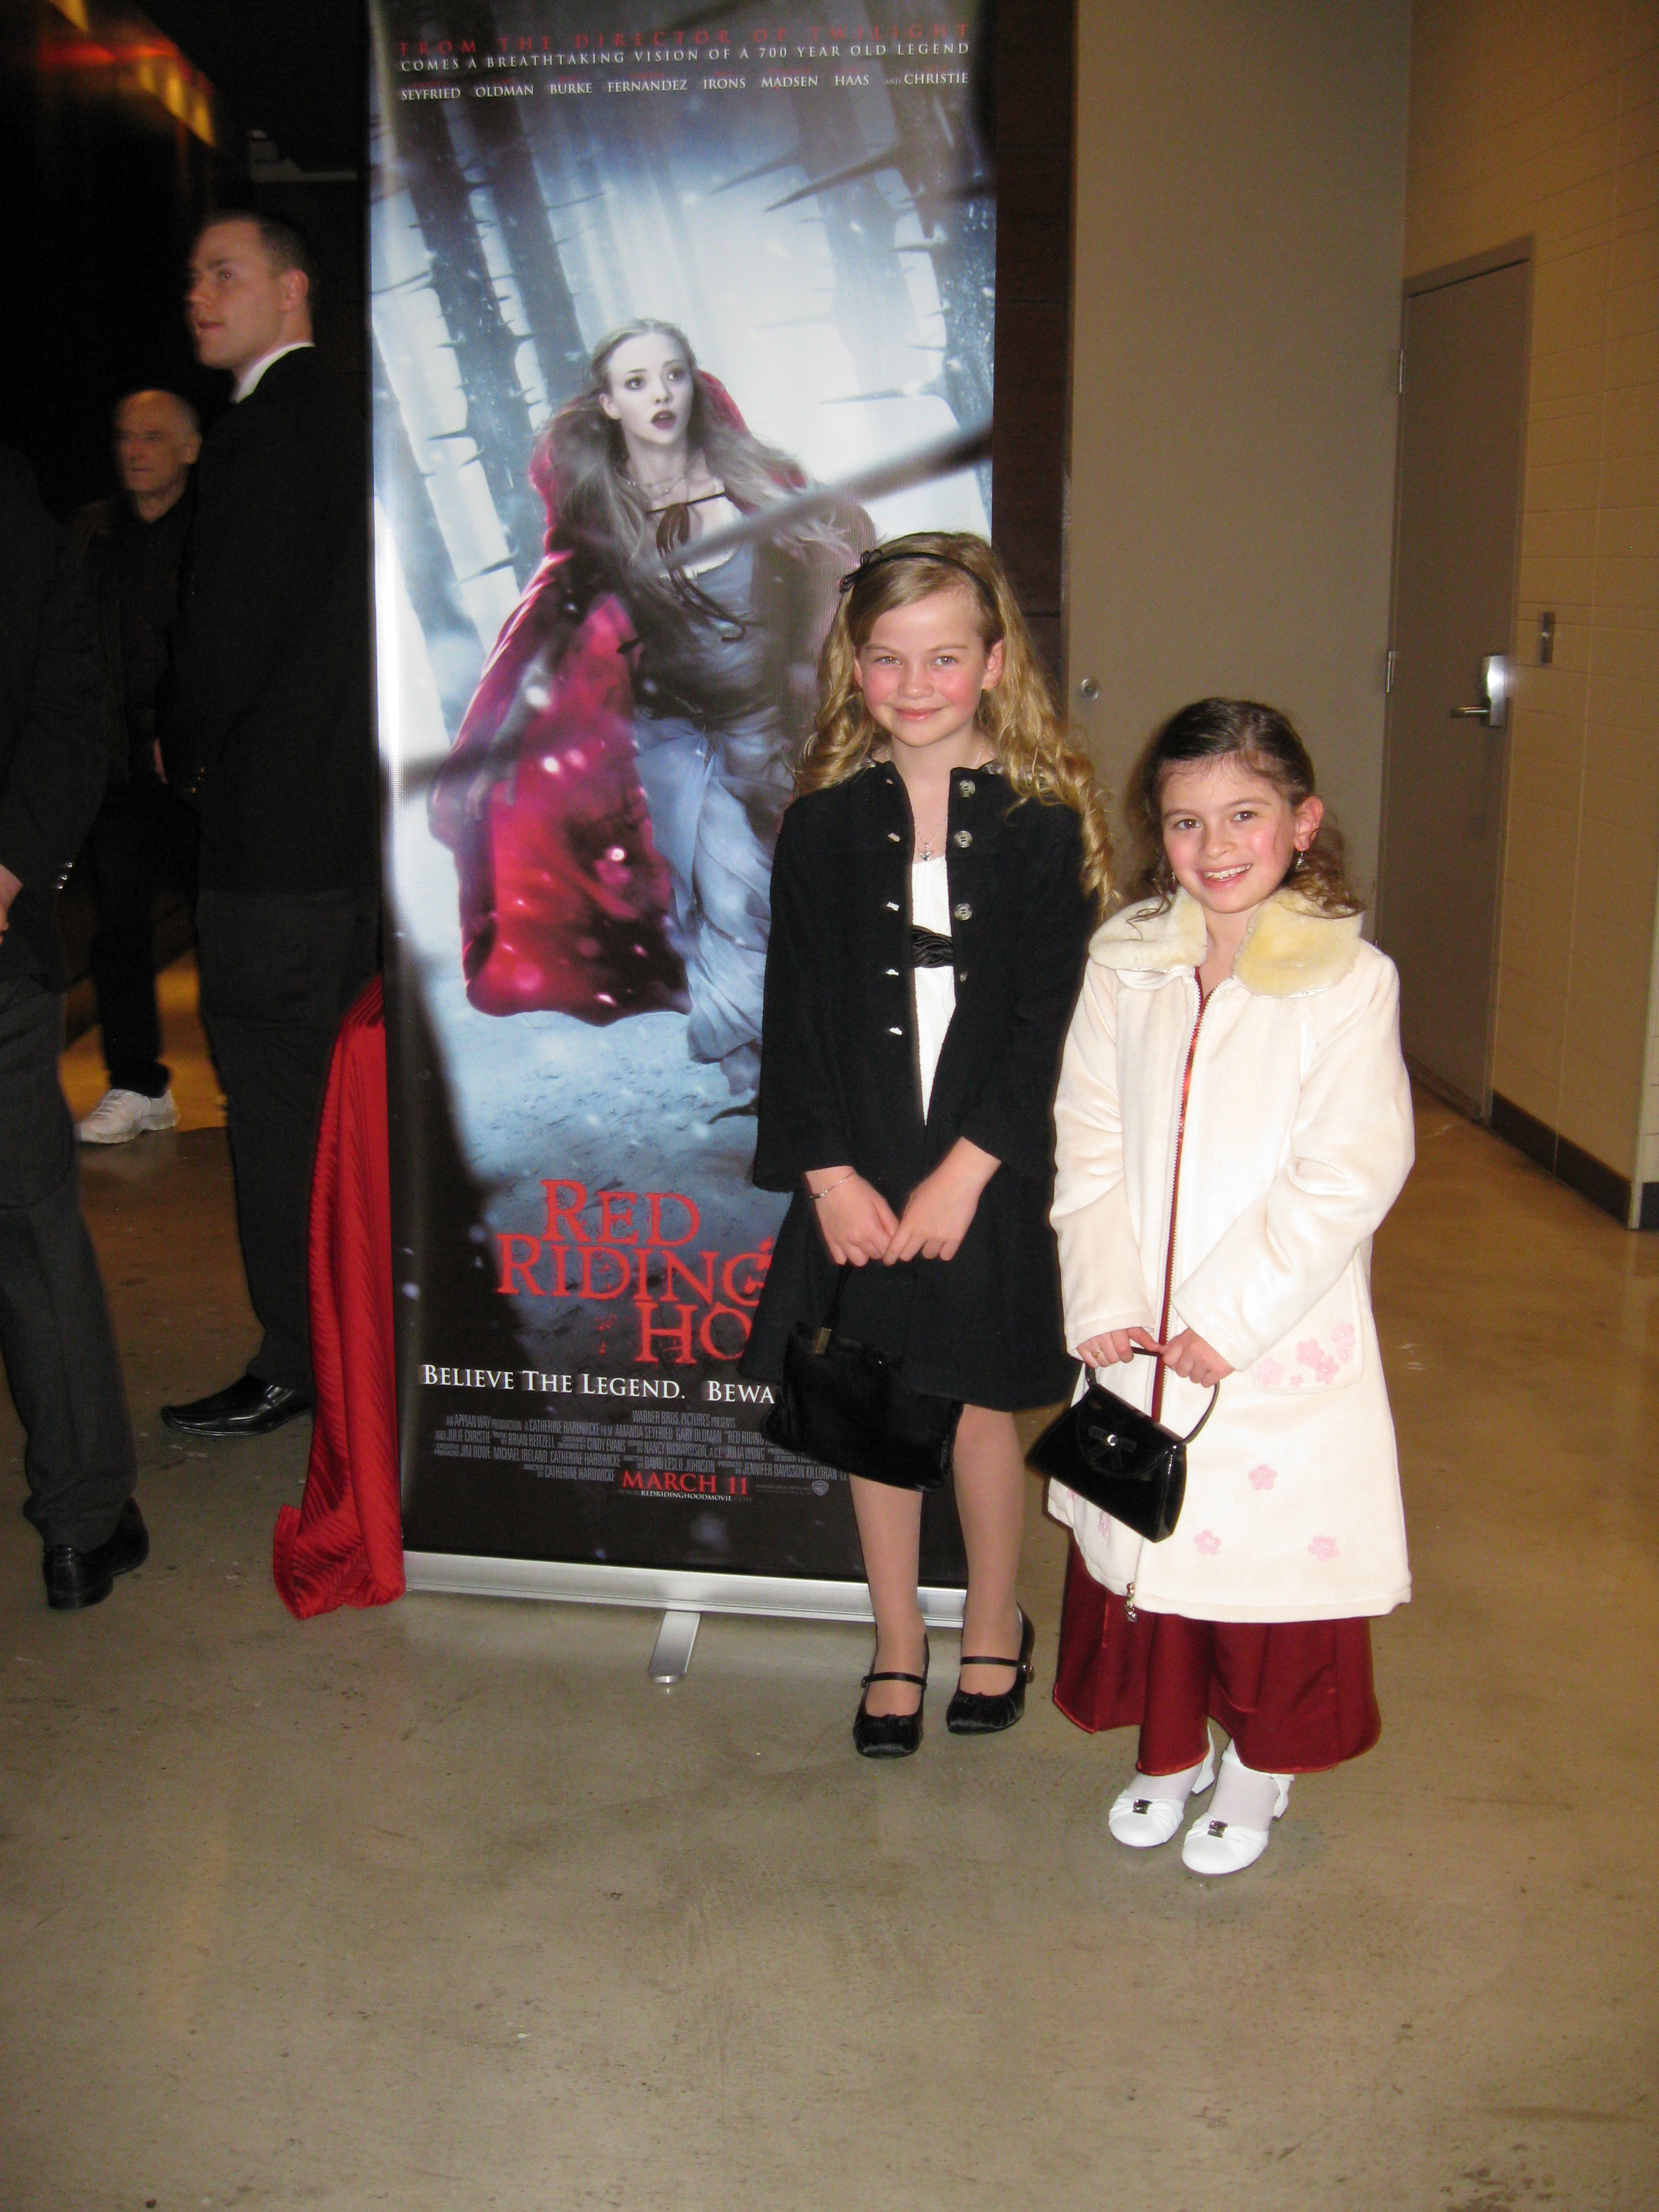 Dalila Bela & Megan Charpentier at the Red Riding Hood Movie Premiere